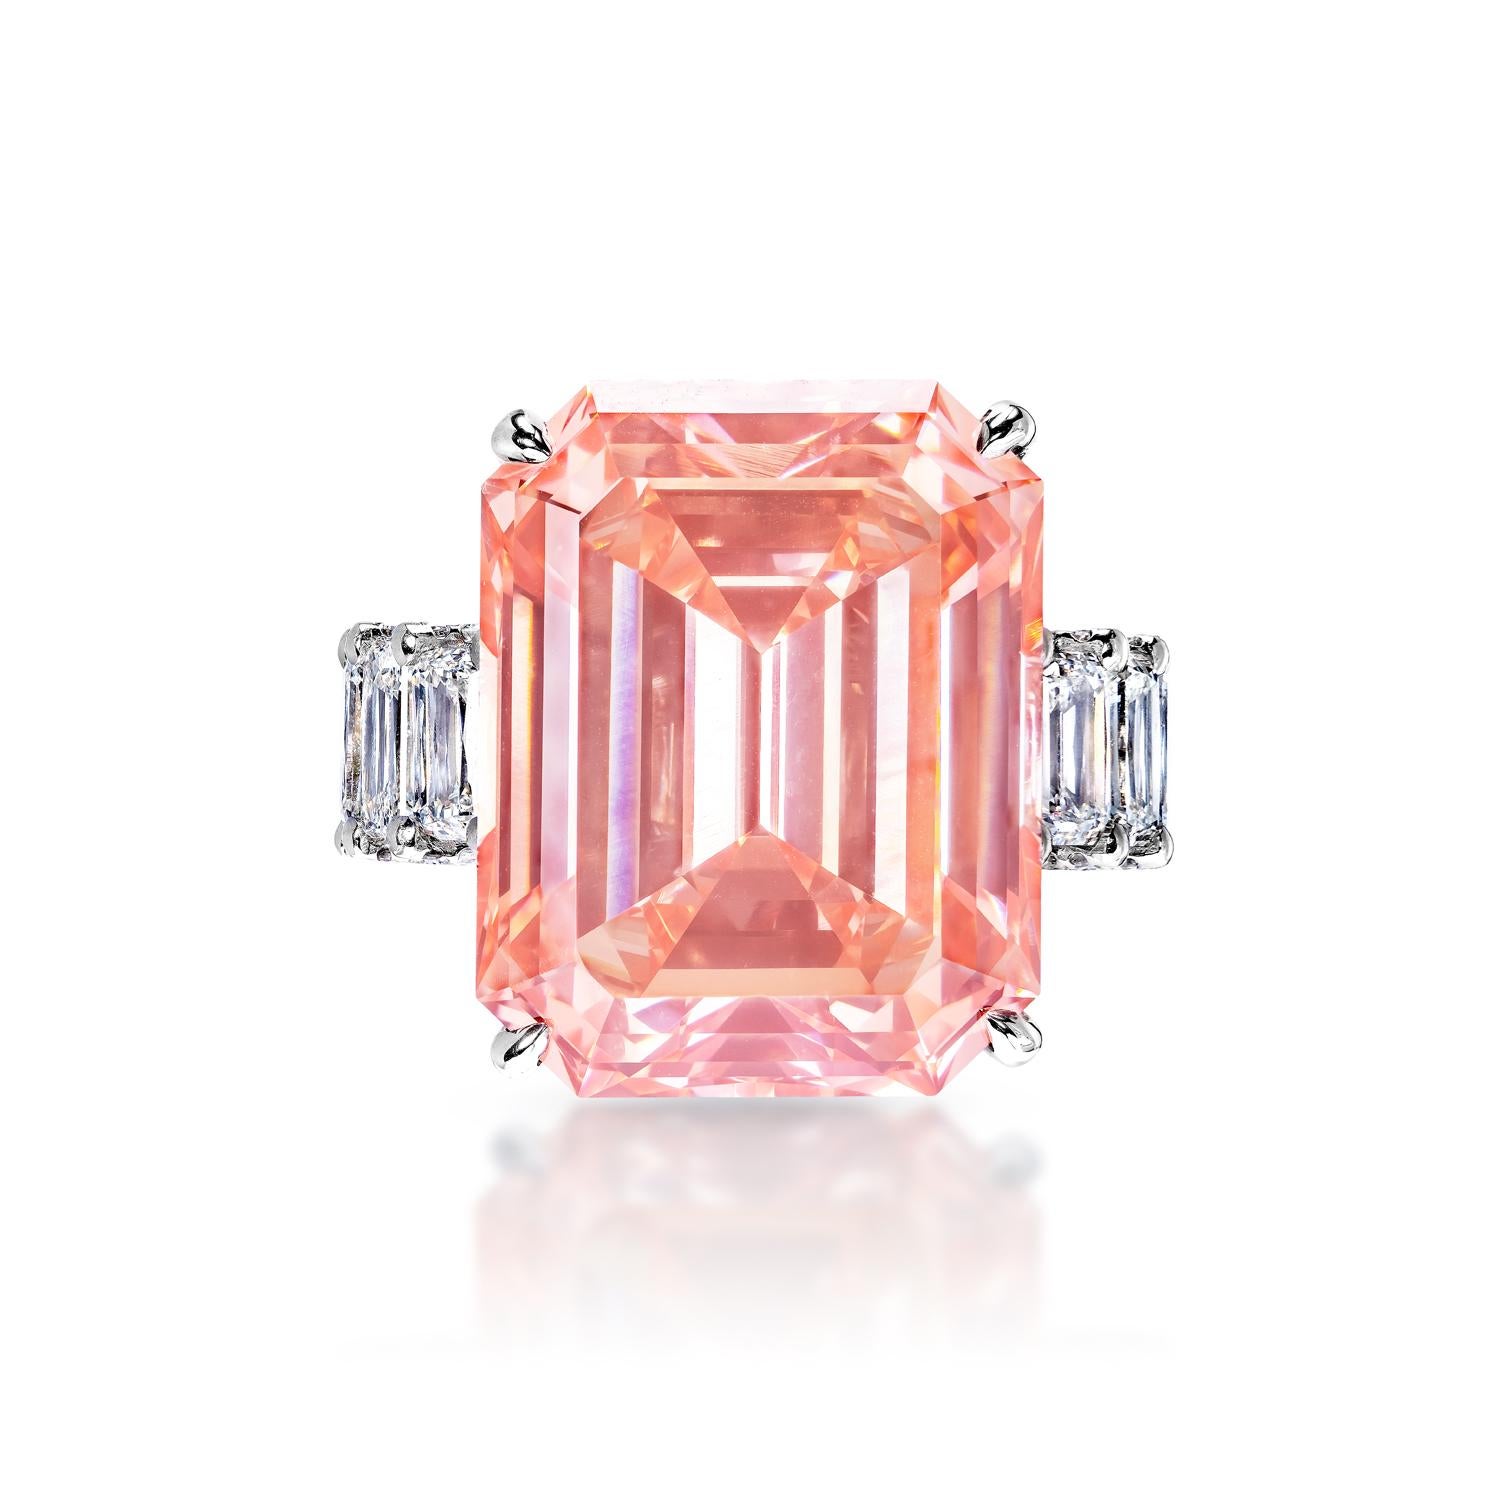 GIA Certified


Center Earth Mined Diamond:
Carat Weight: 23.12 Carats
Color: Fancy Vivid Pink*
Clarity: VVS2
Style: Emerald Cut
*This Diamond has been treated by one or more processes to change its color

Ring:
Metal: 18 Karat White Gold
Carat